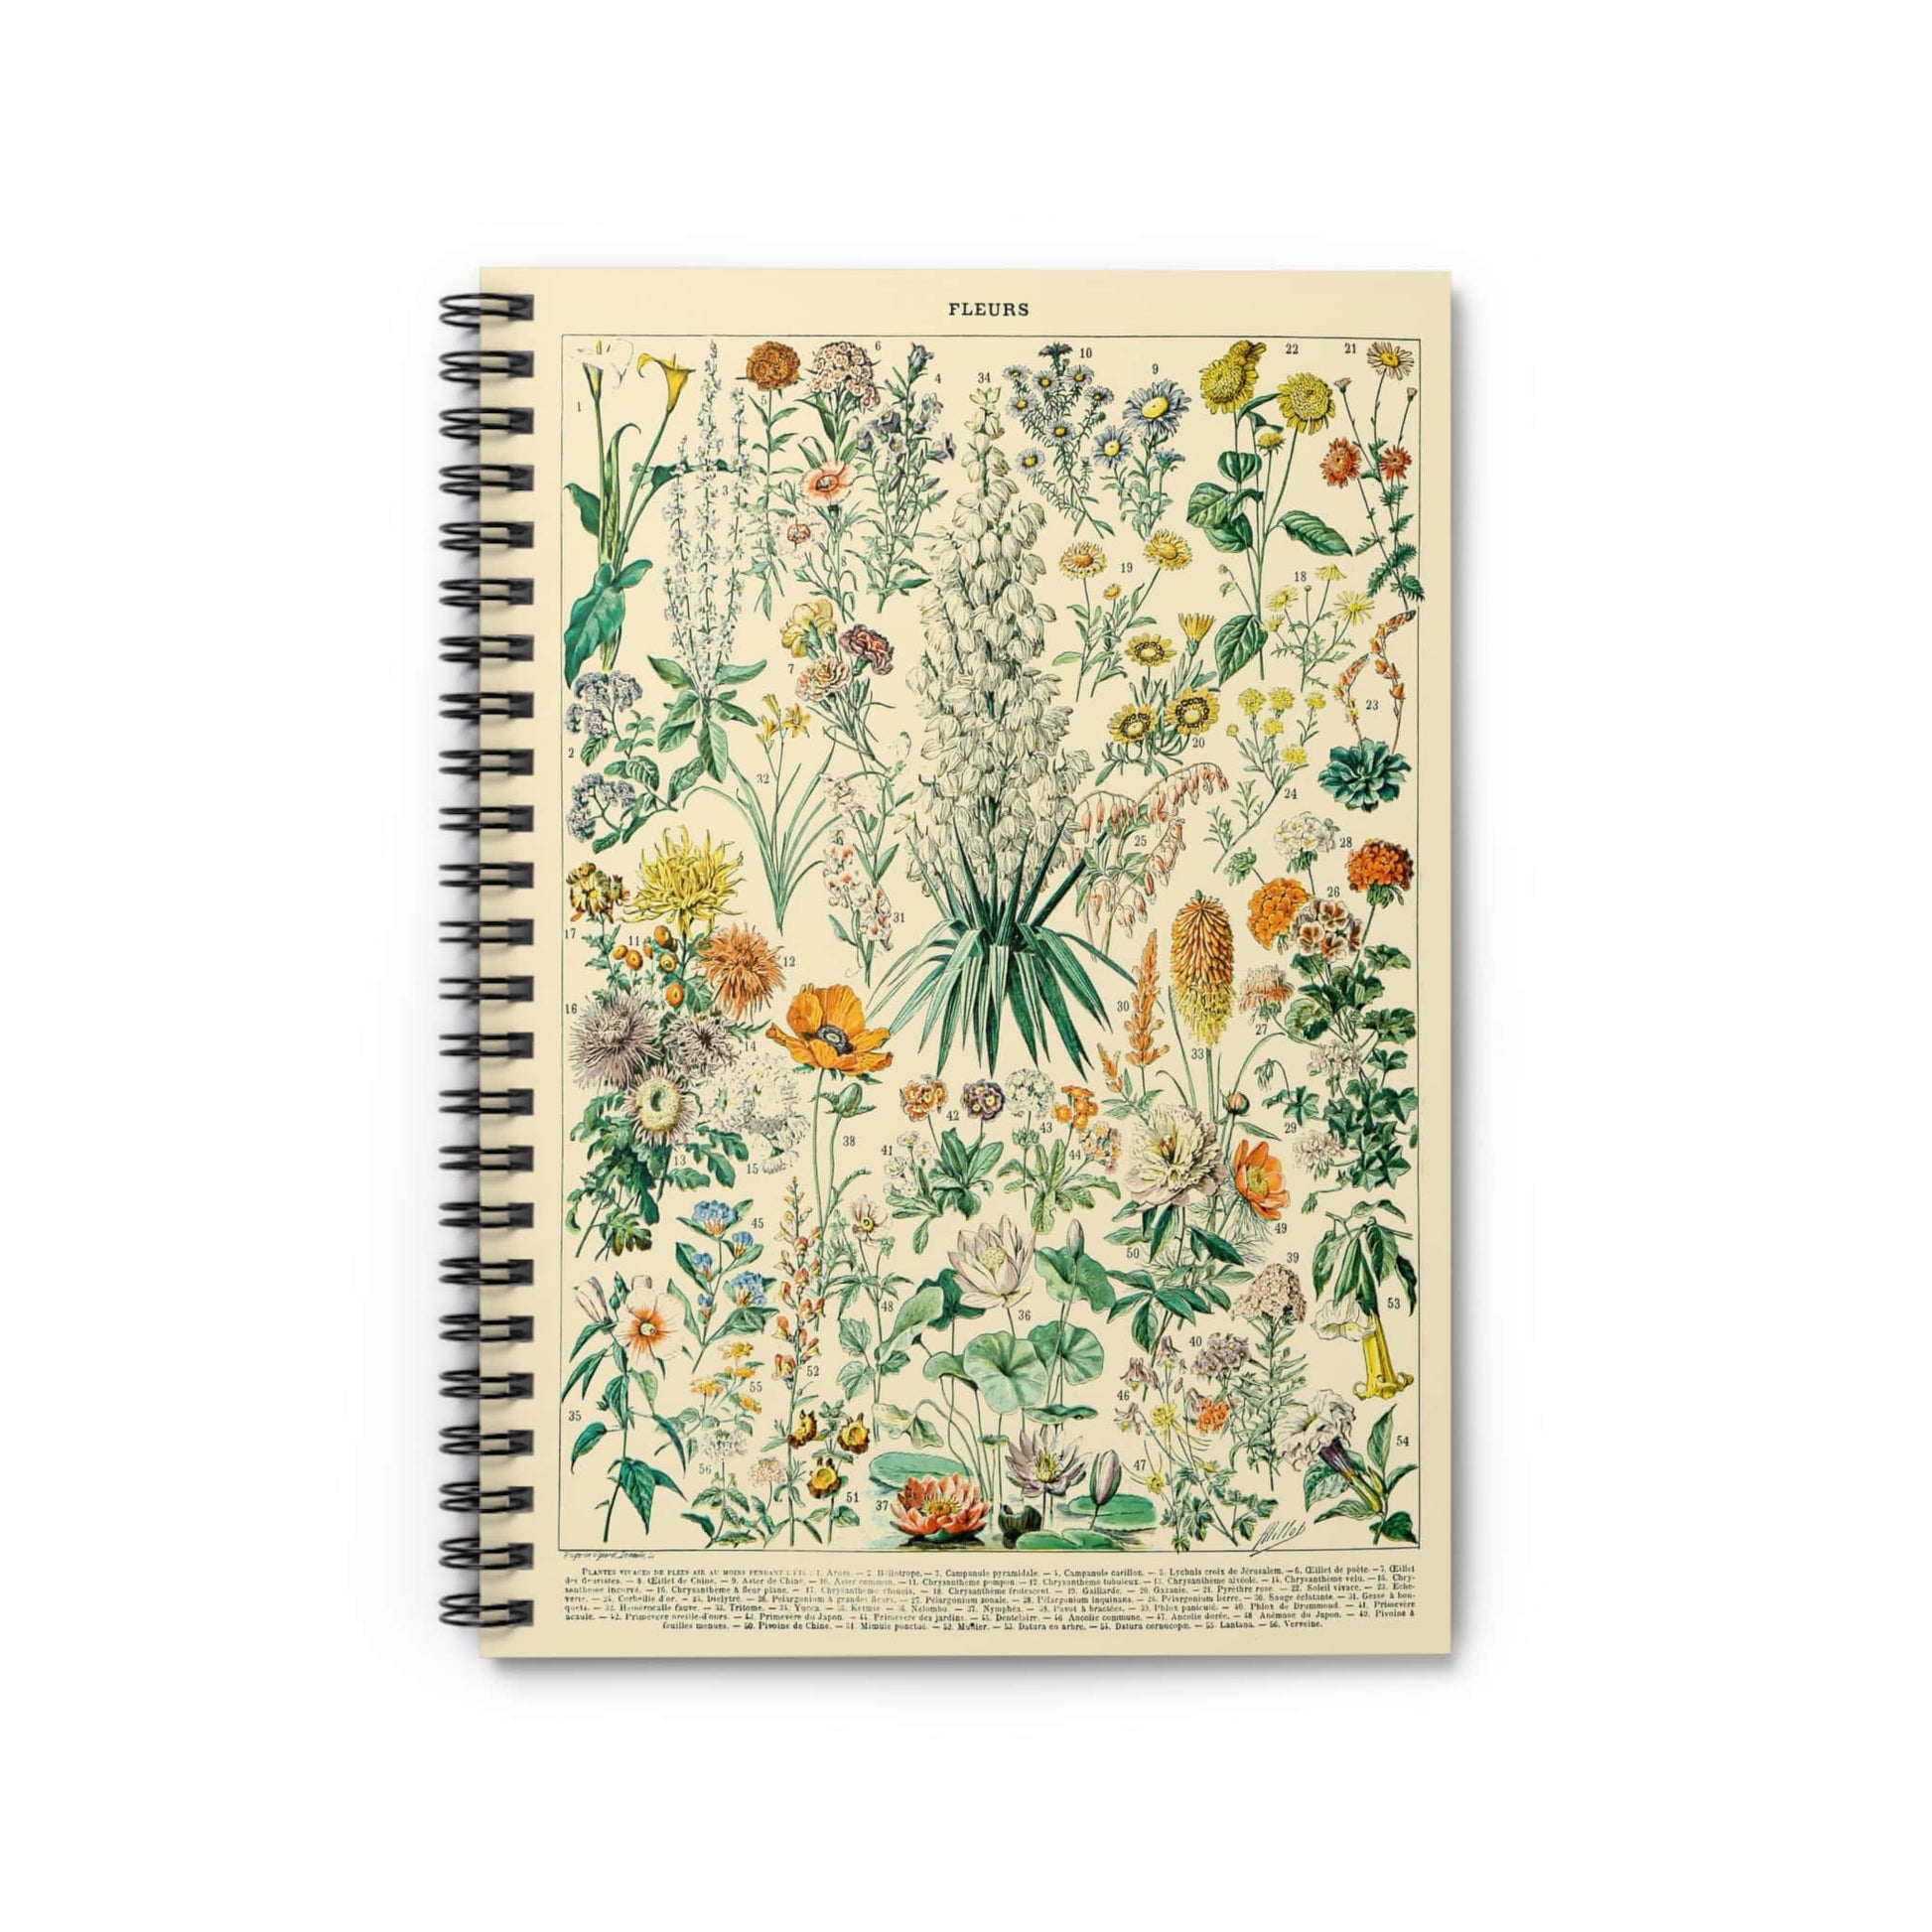 Wildflowers Notebook with floral cover, perfect for journaling and planning, featuring a variety of wildflower designs.